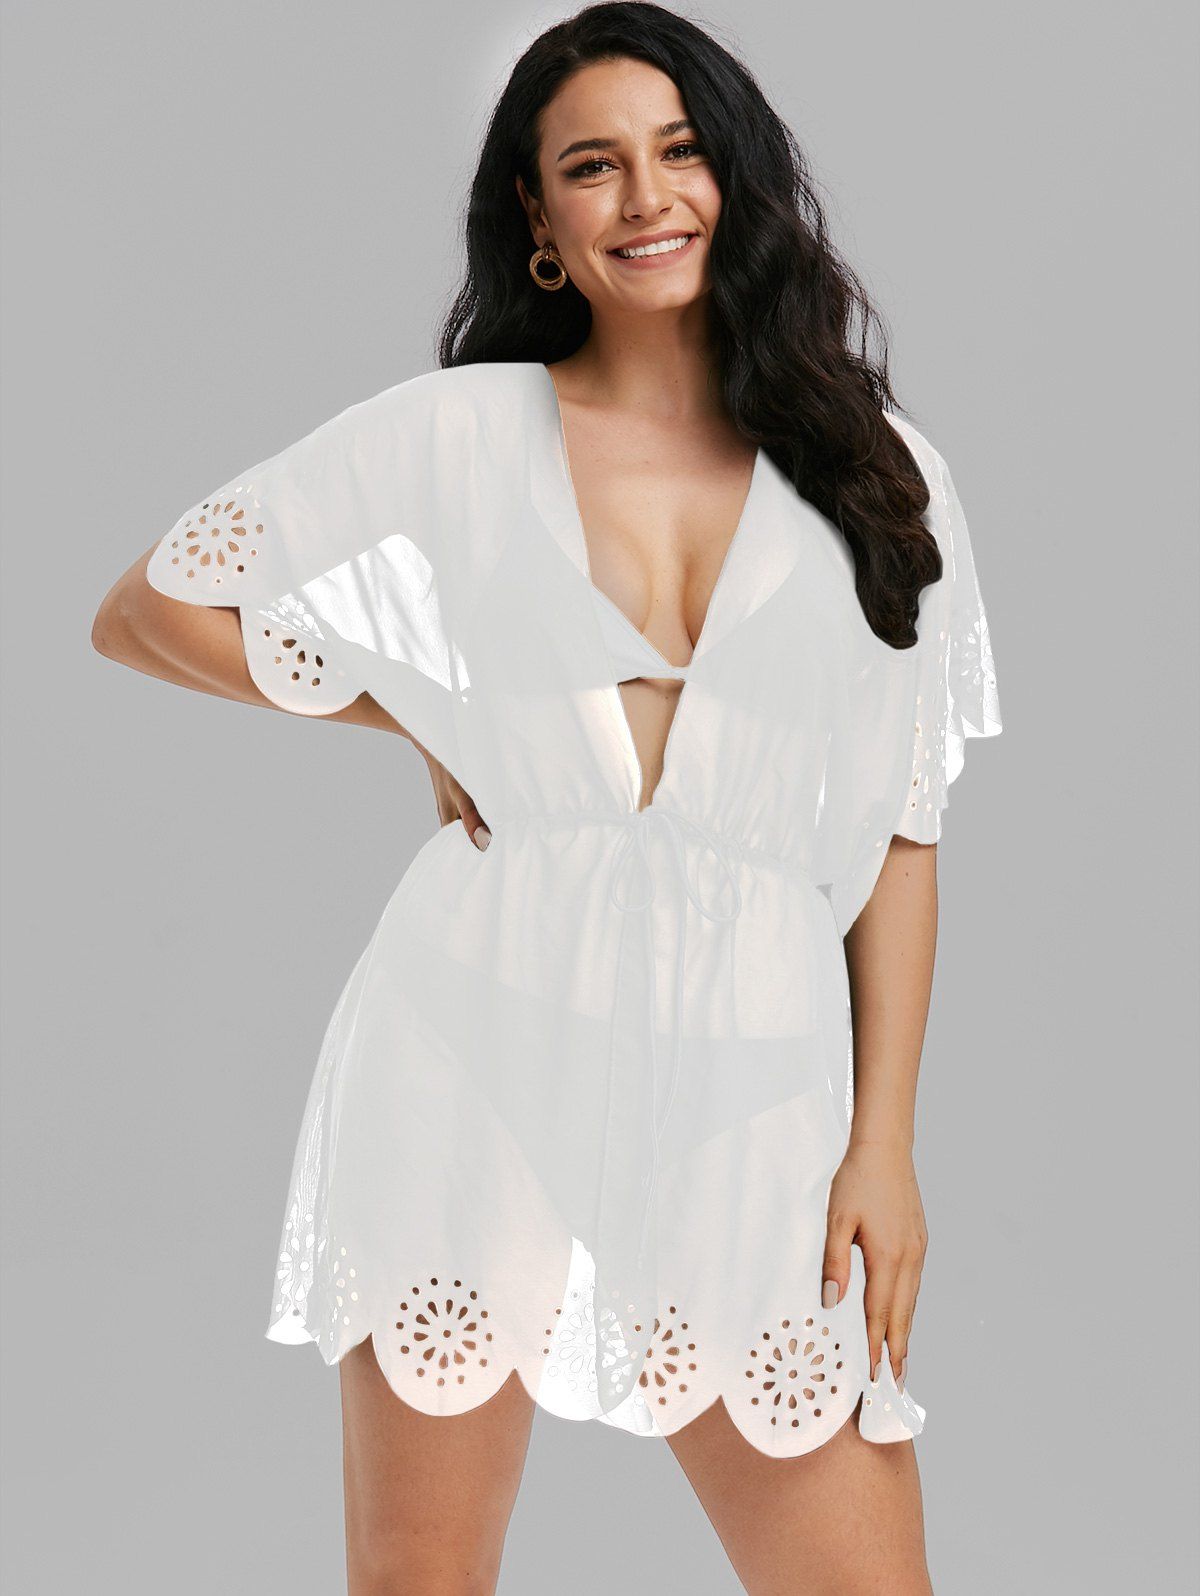 Sheer Cover Up Laser Cut Out Scalloped Plunging Neck Bat Sleeve Tunic Beach Top - WHITE 2XL